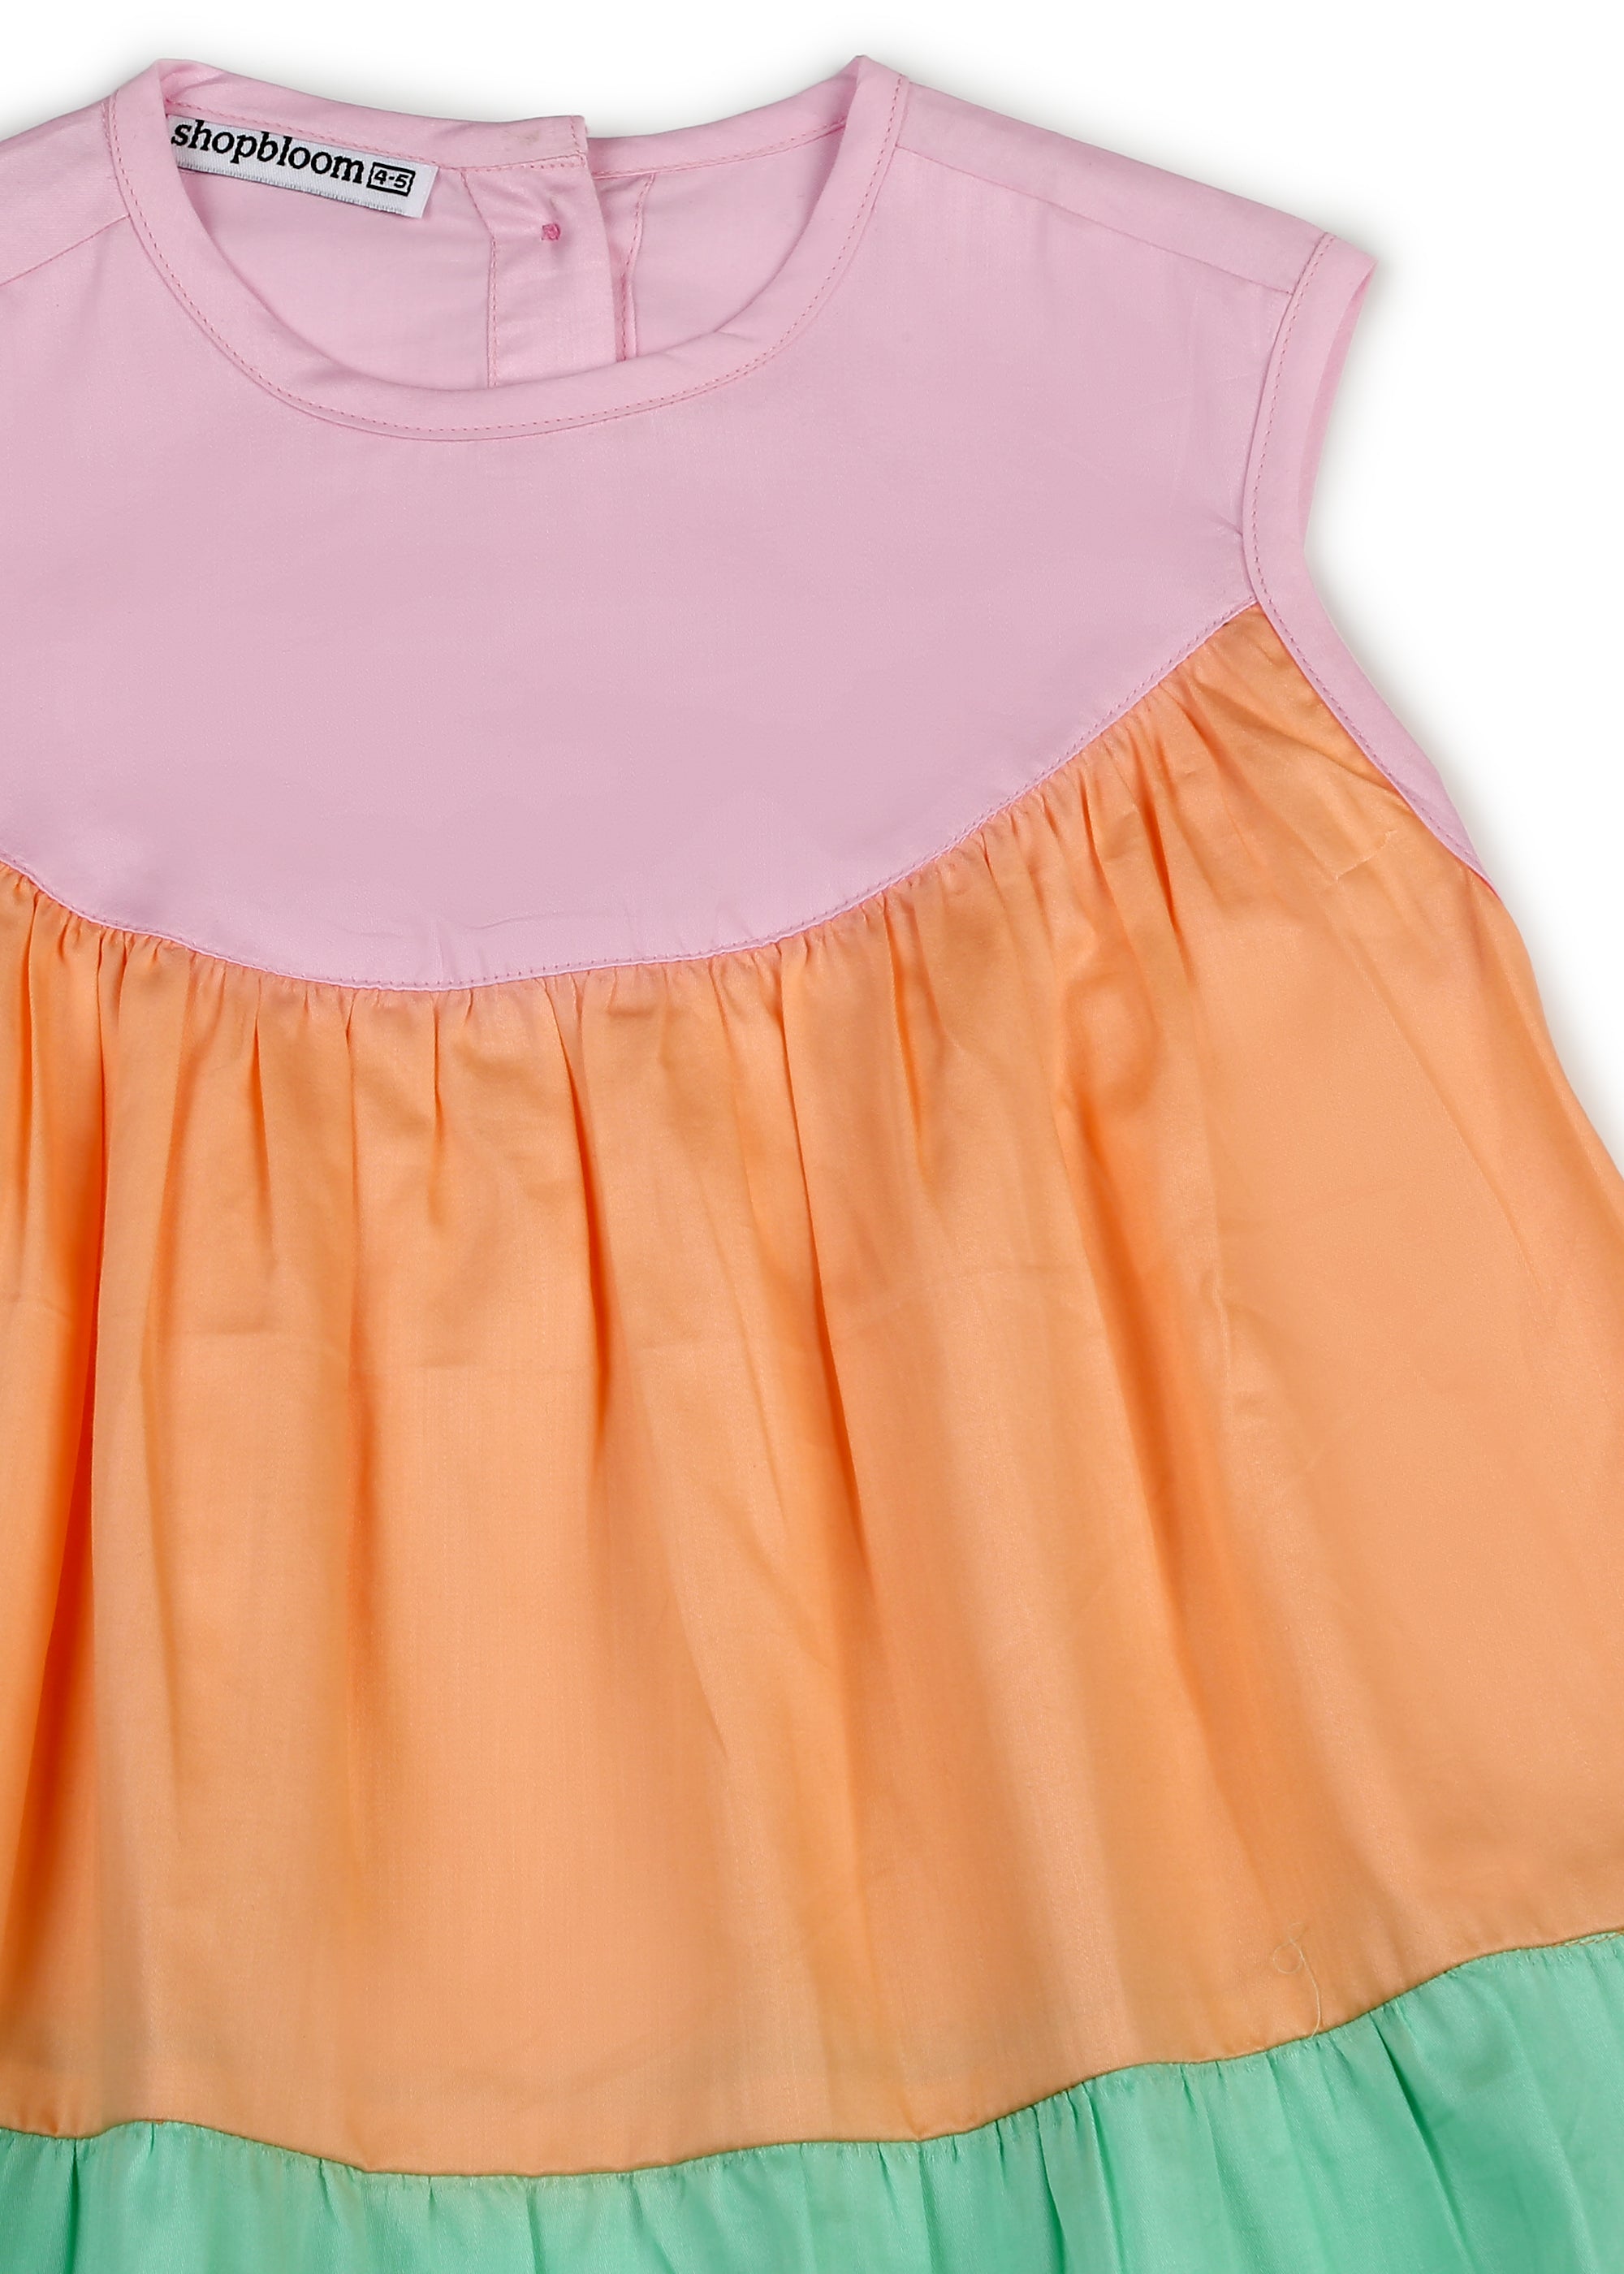 Pastel Tiered Girl's Dress